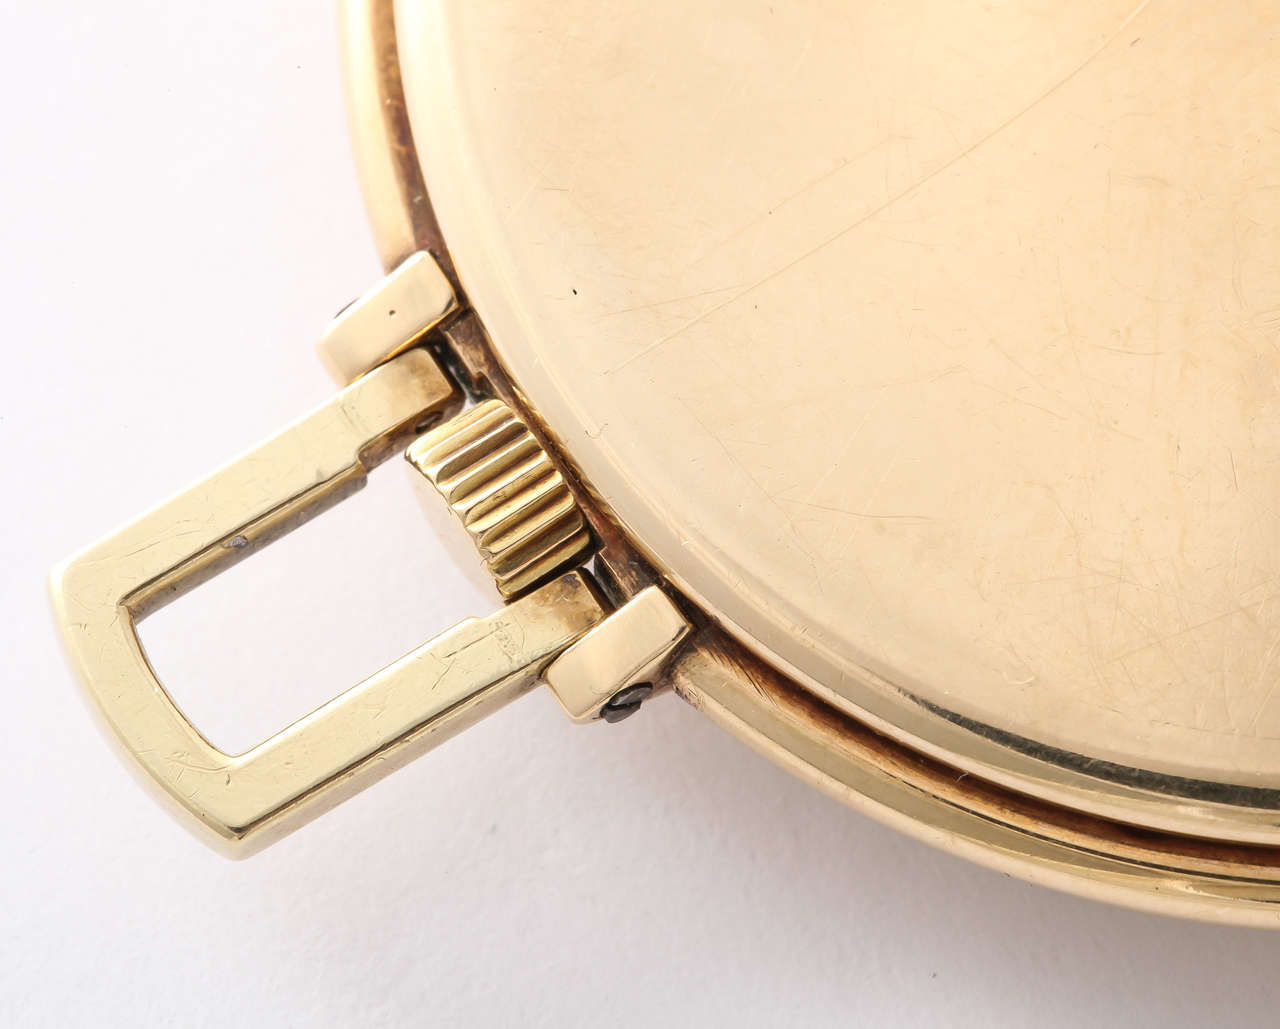 jaeger lecoultre pocket watch